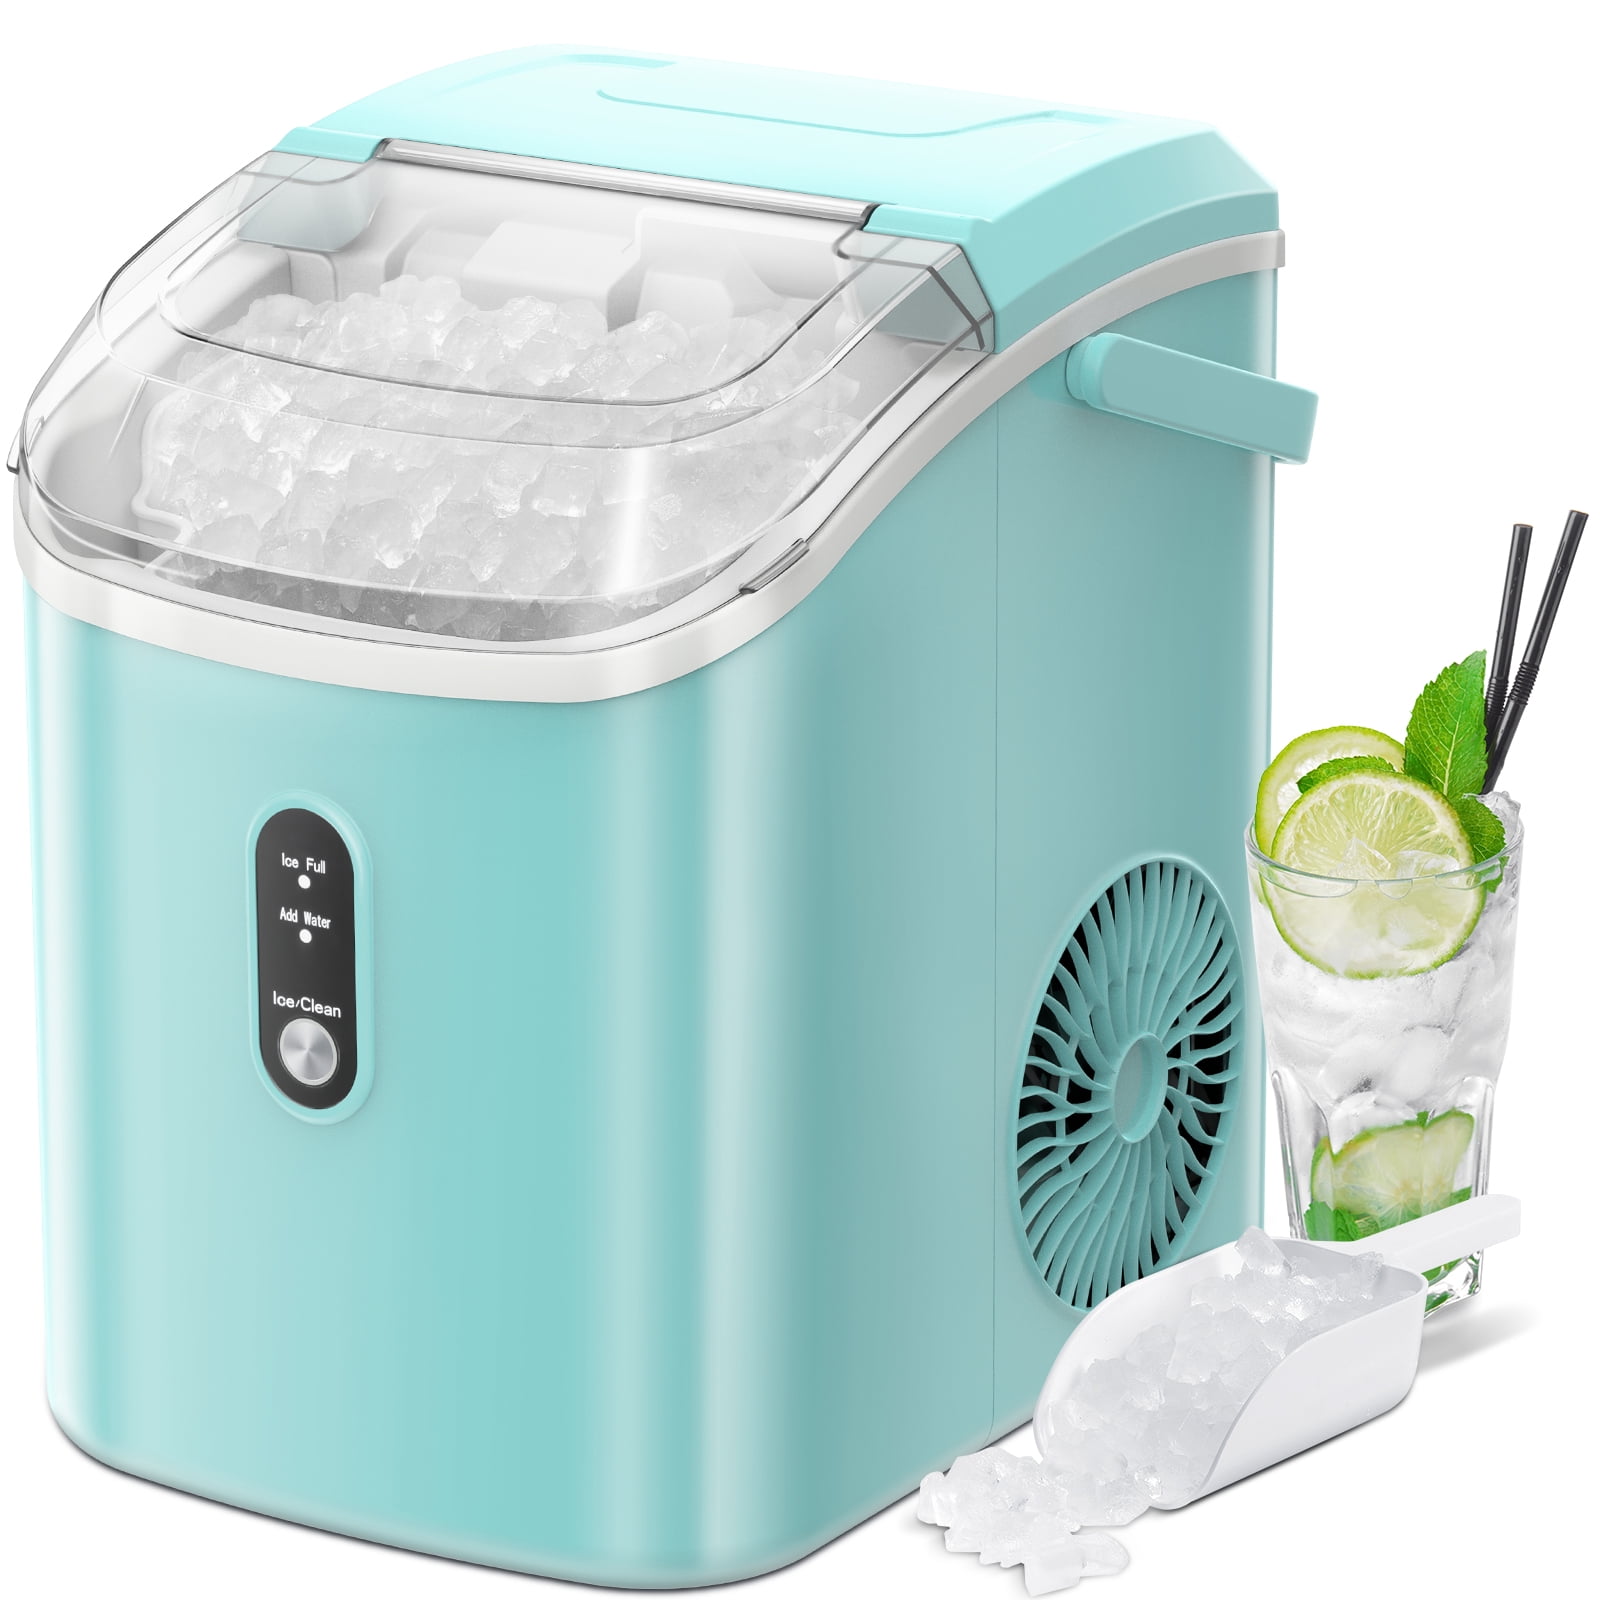 Dreamice X3 Nugget Ice Maker Machine, Countertop, Chewable Sonic,  Self-Cleaning Function, Kid Friendly, 40lbs, 24h - AliExpress